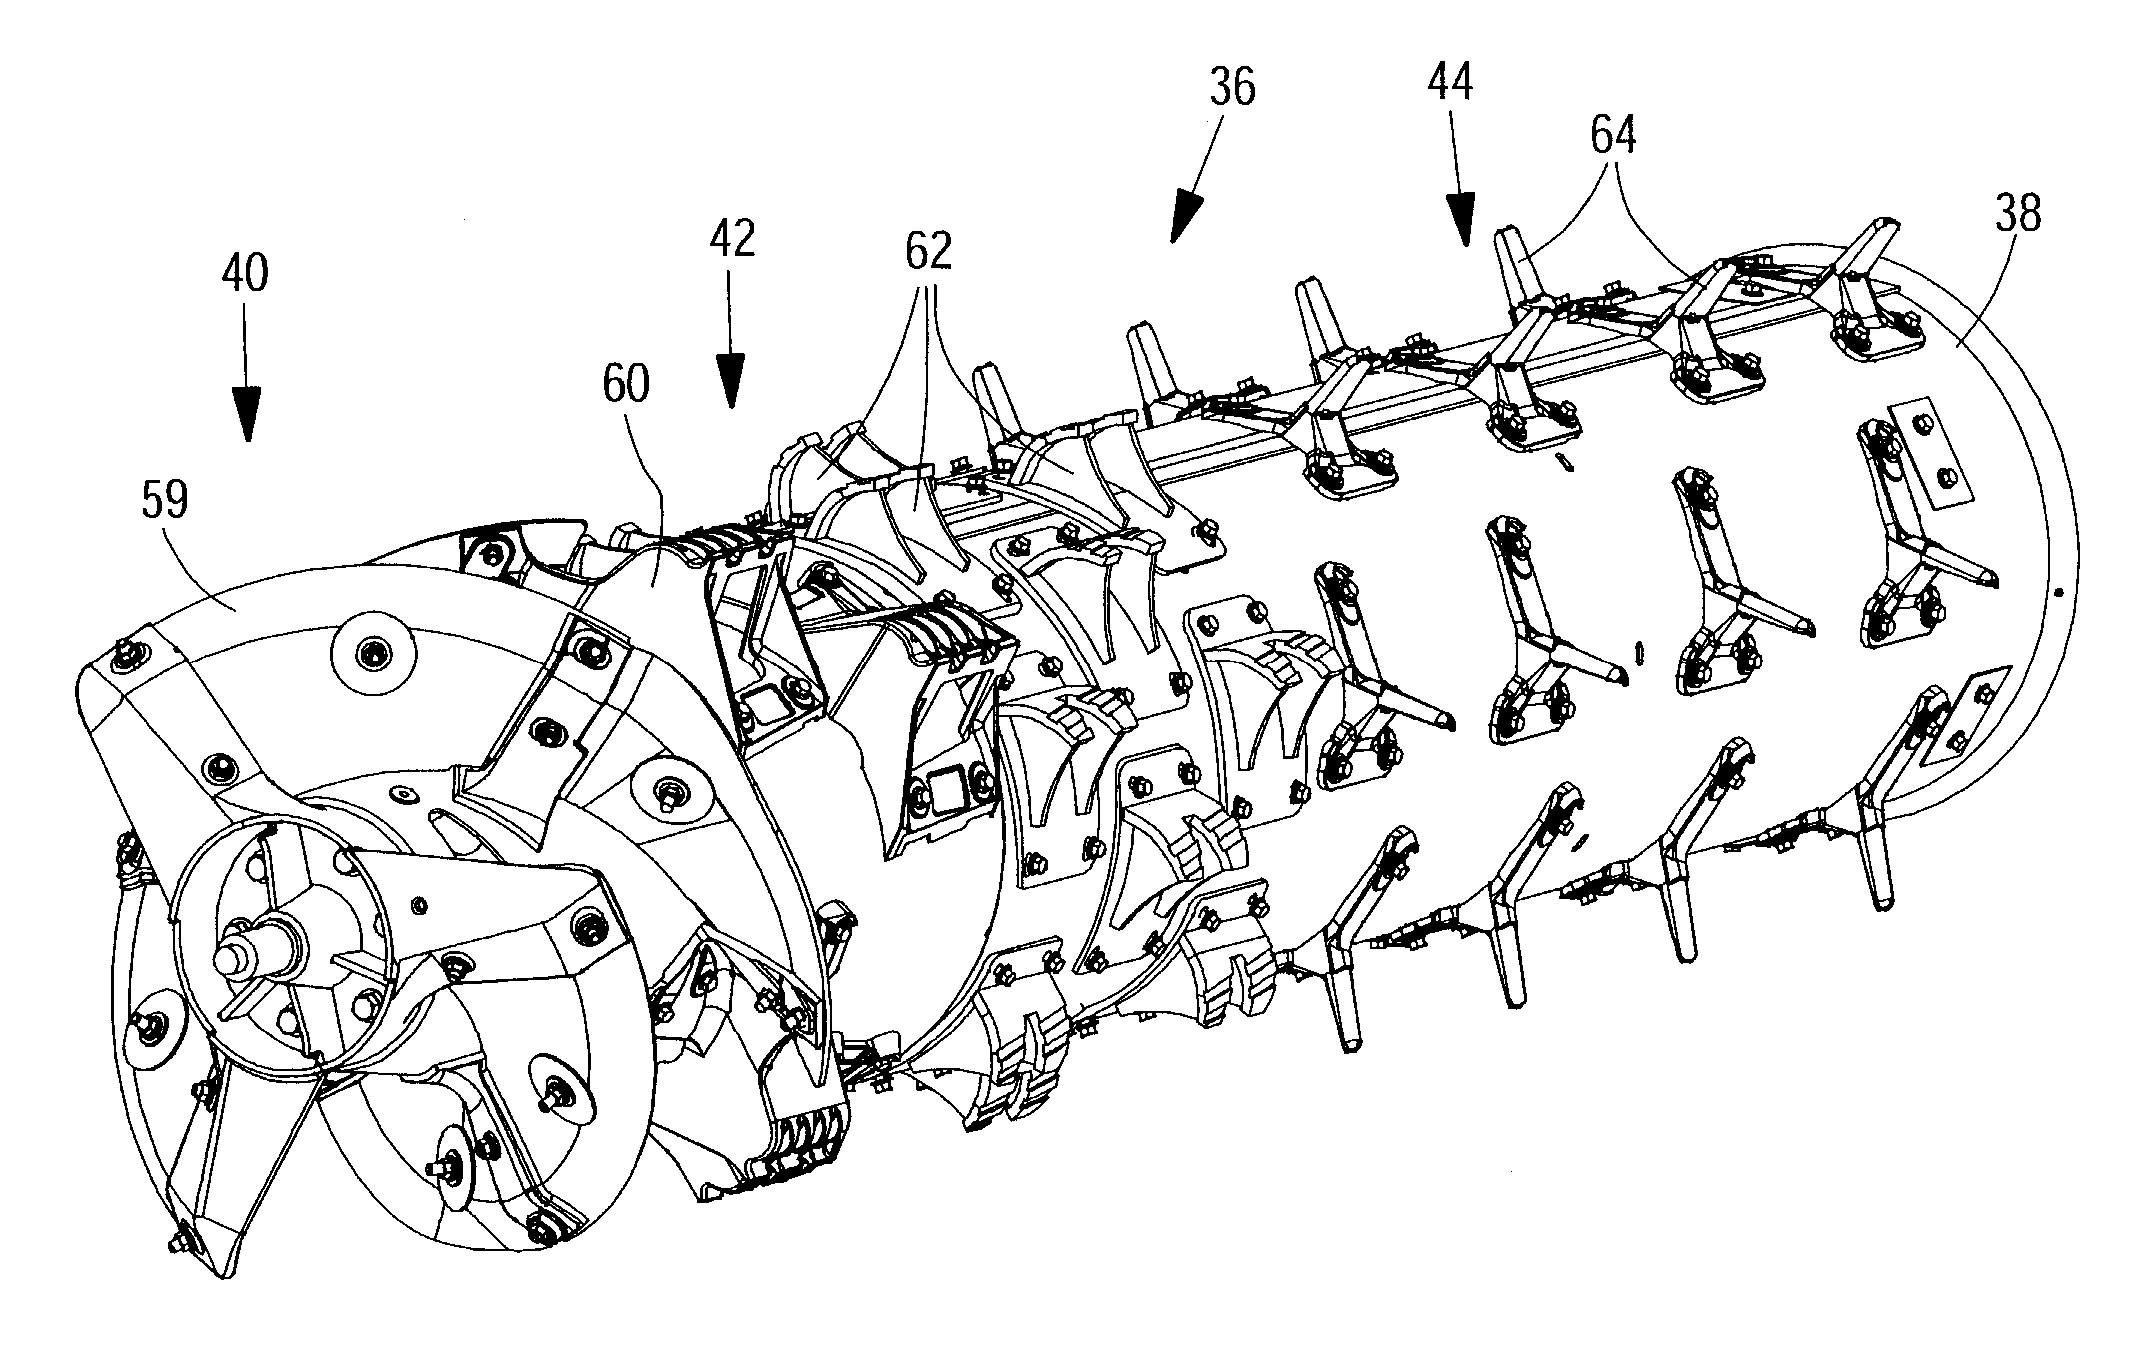 Harvested crop processing unit with number of circulation circuits depending on throughput